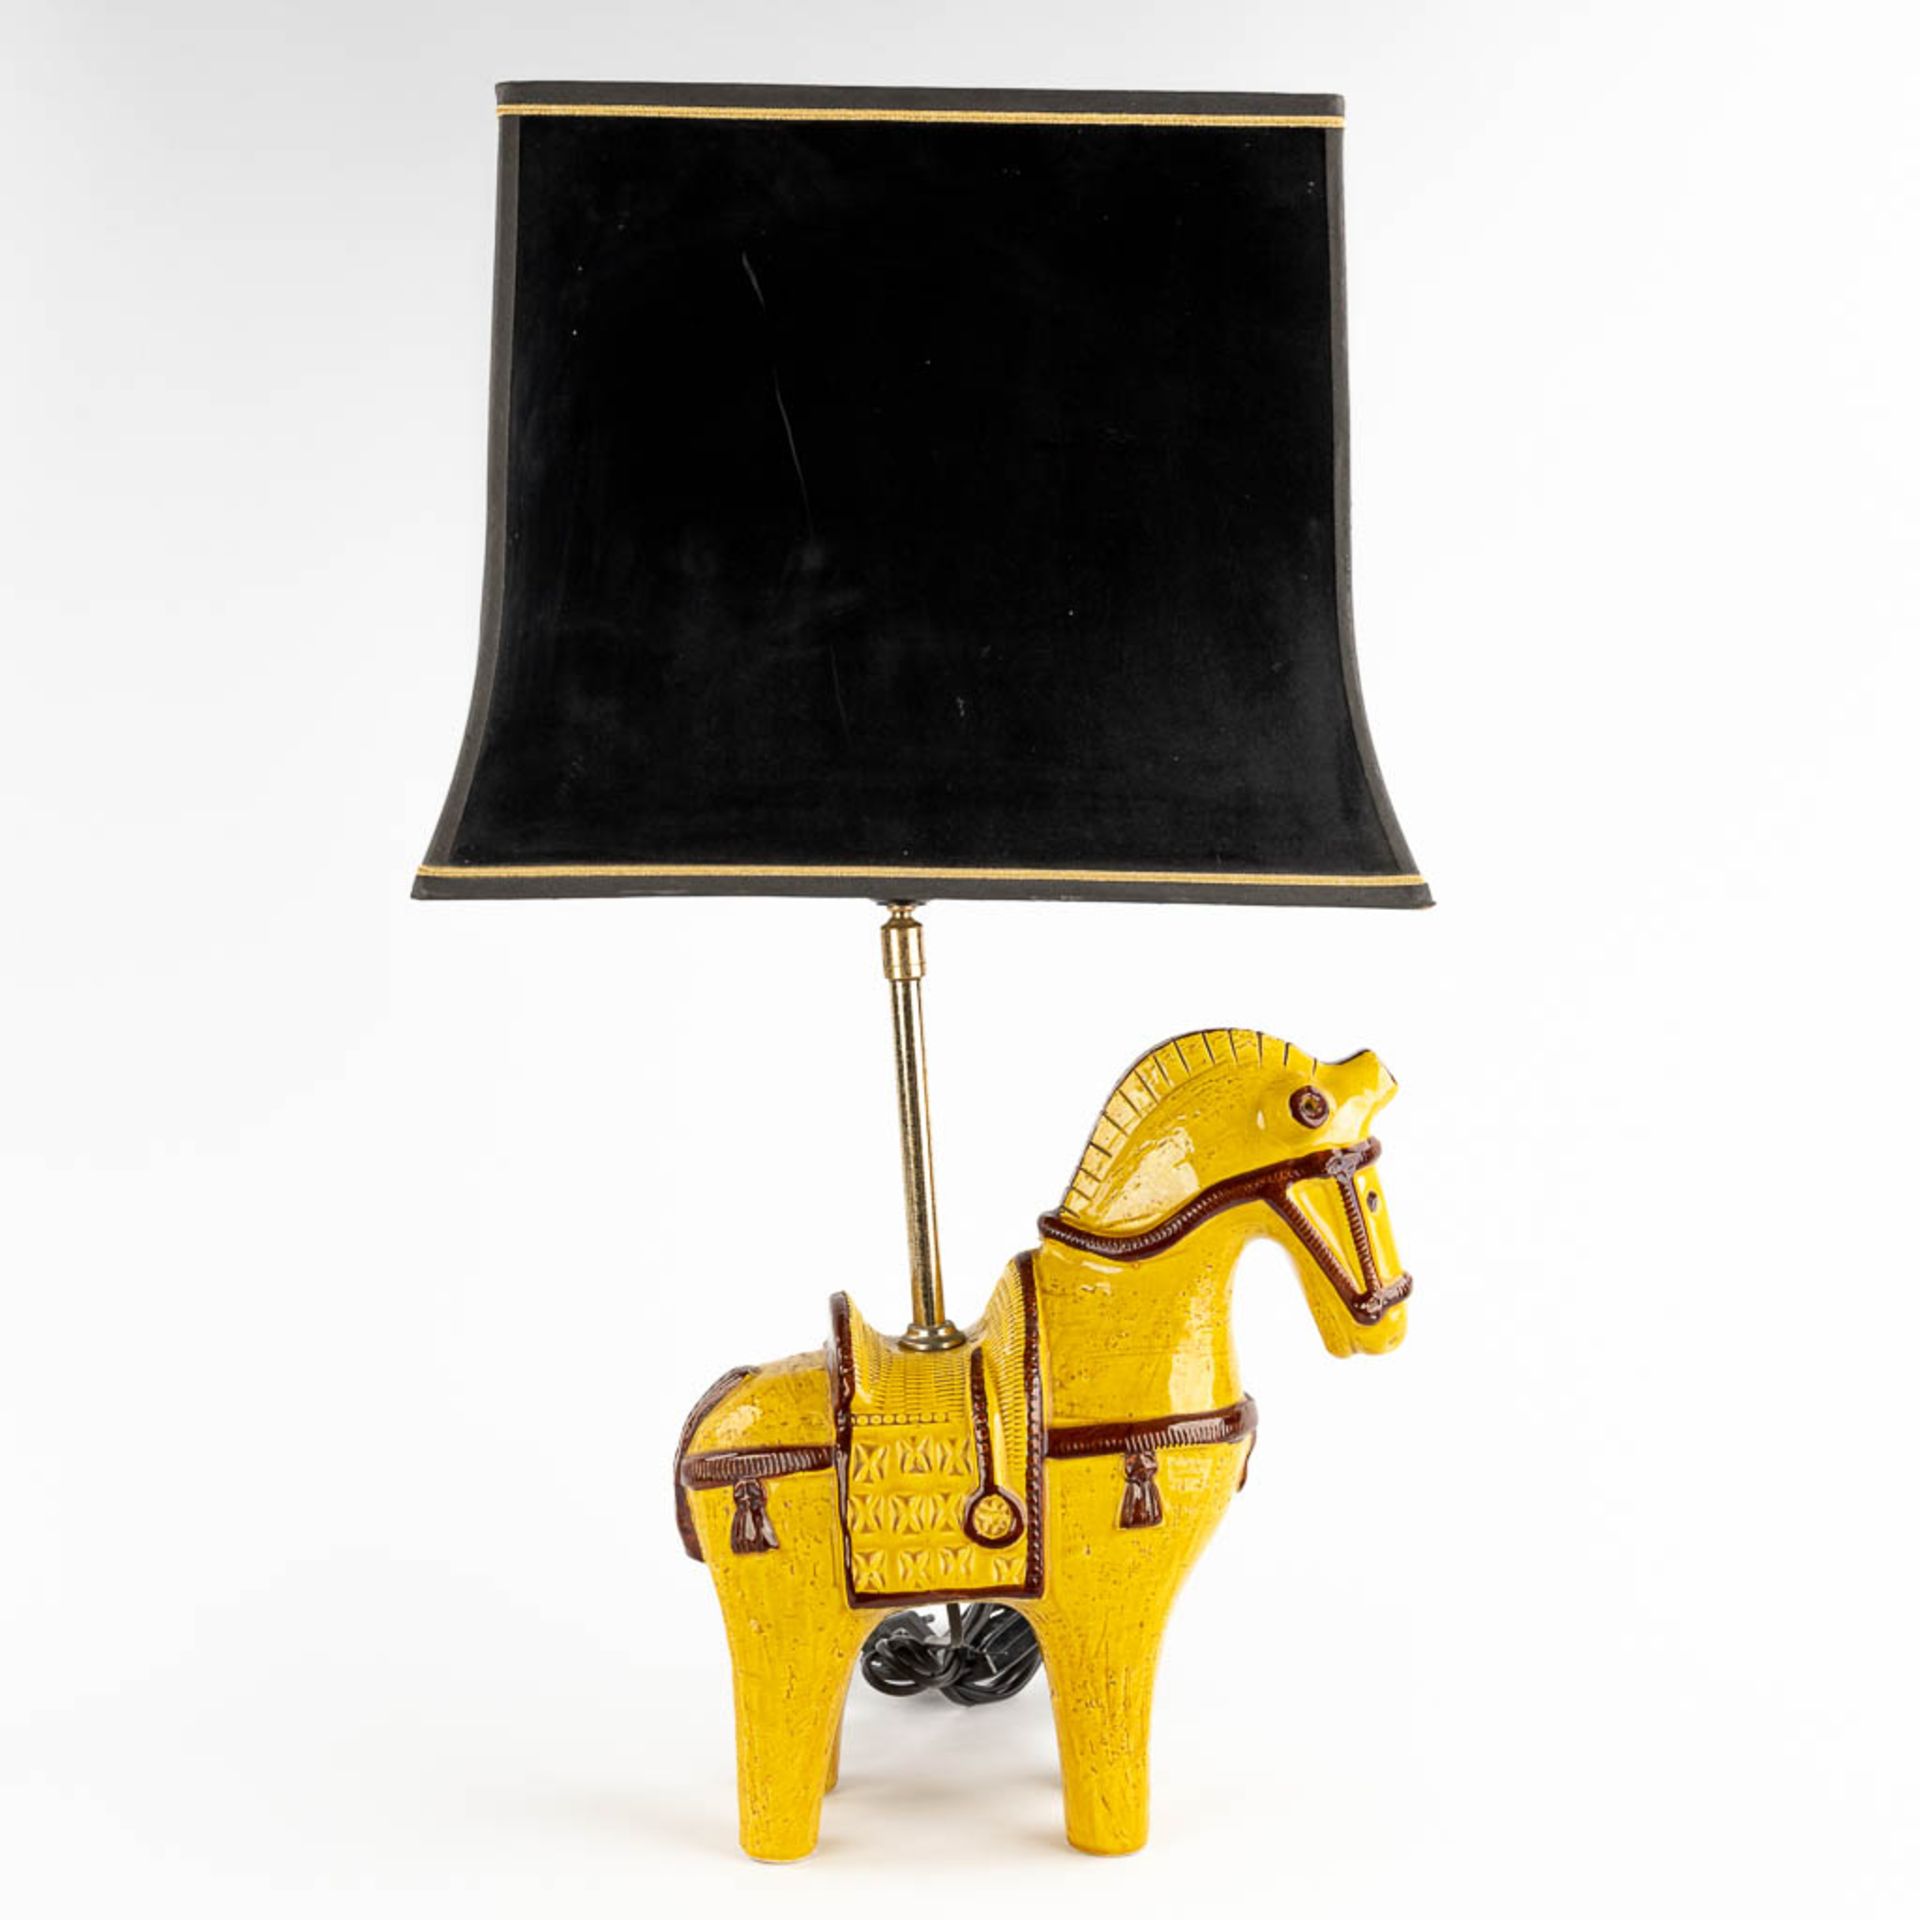 Aldo LONDI (1911-2003) 'Table Lamp with a yellow horse' for Bitossi. (D:12 x W:30 x H:32 cm) - Bild 3 aus 12